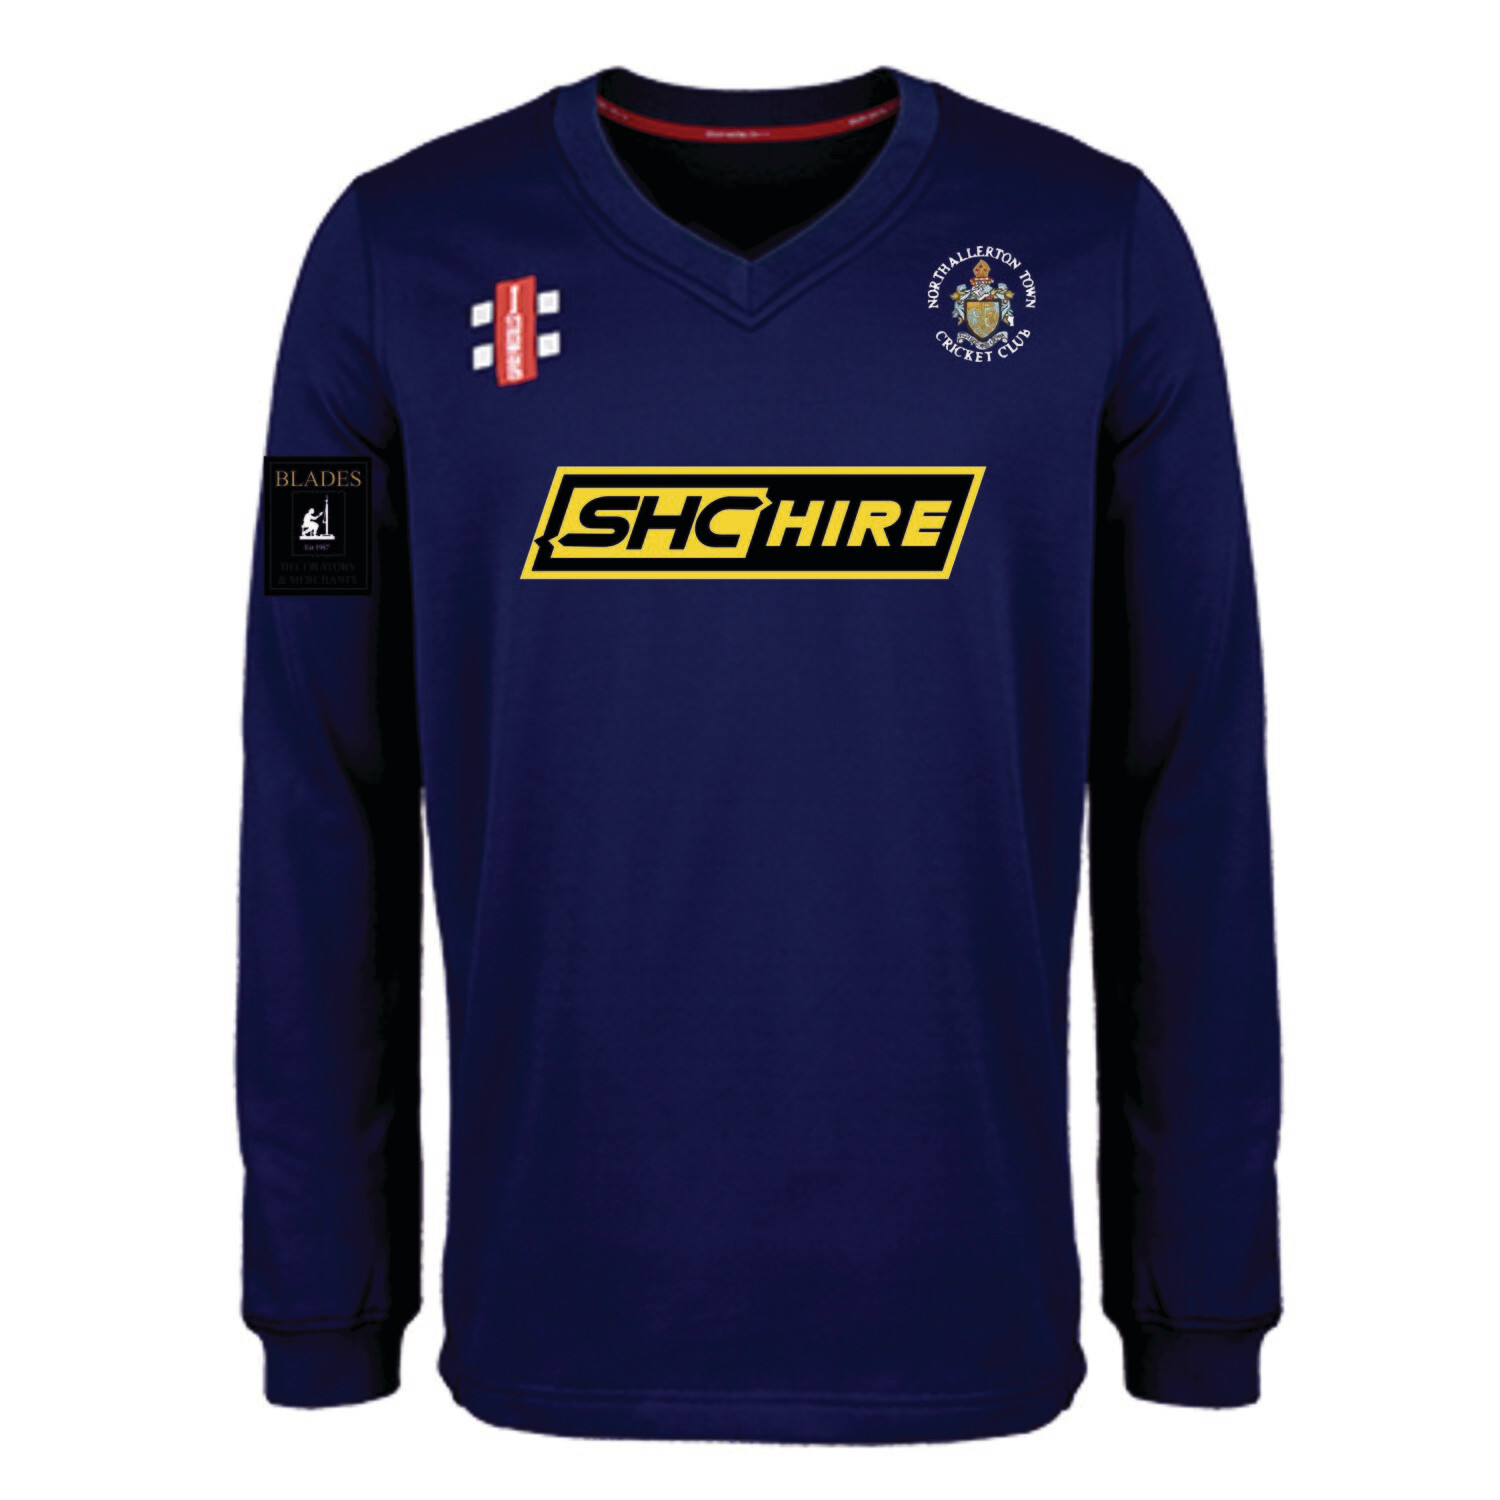 Northallerton Town T20 Long Sleeve Sweater